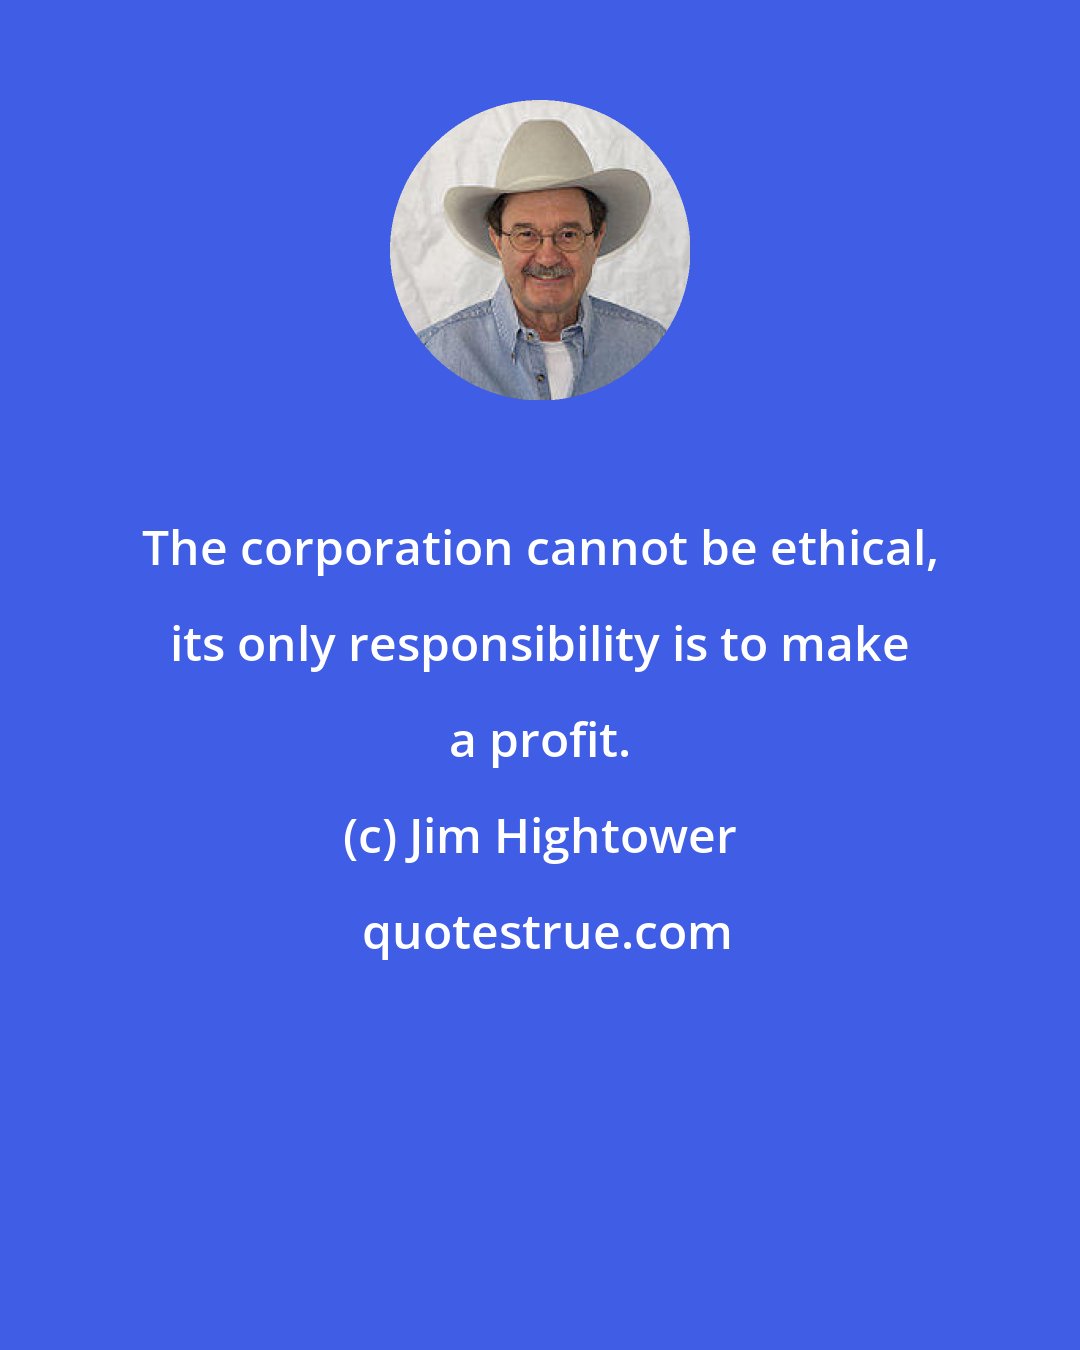 Jim Hightower: The corporation cannot be ethical, its only responsibility is to make a profit.